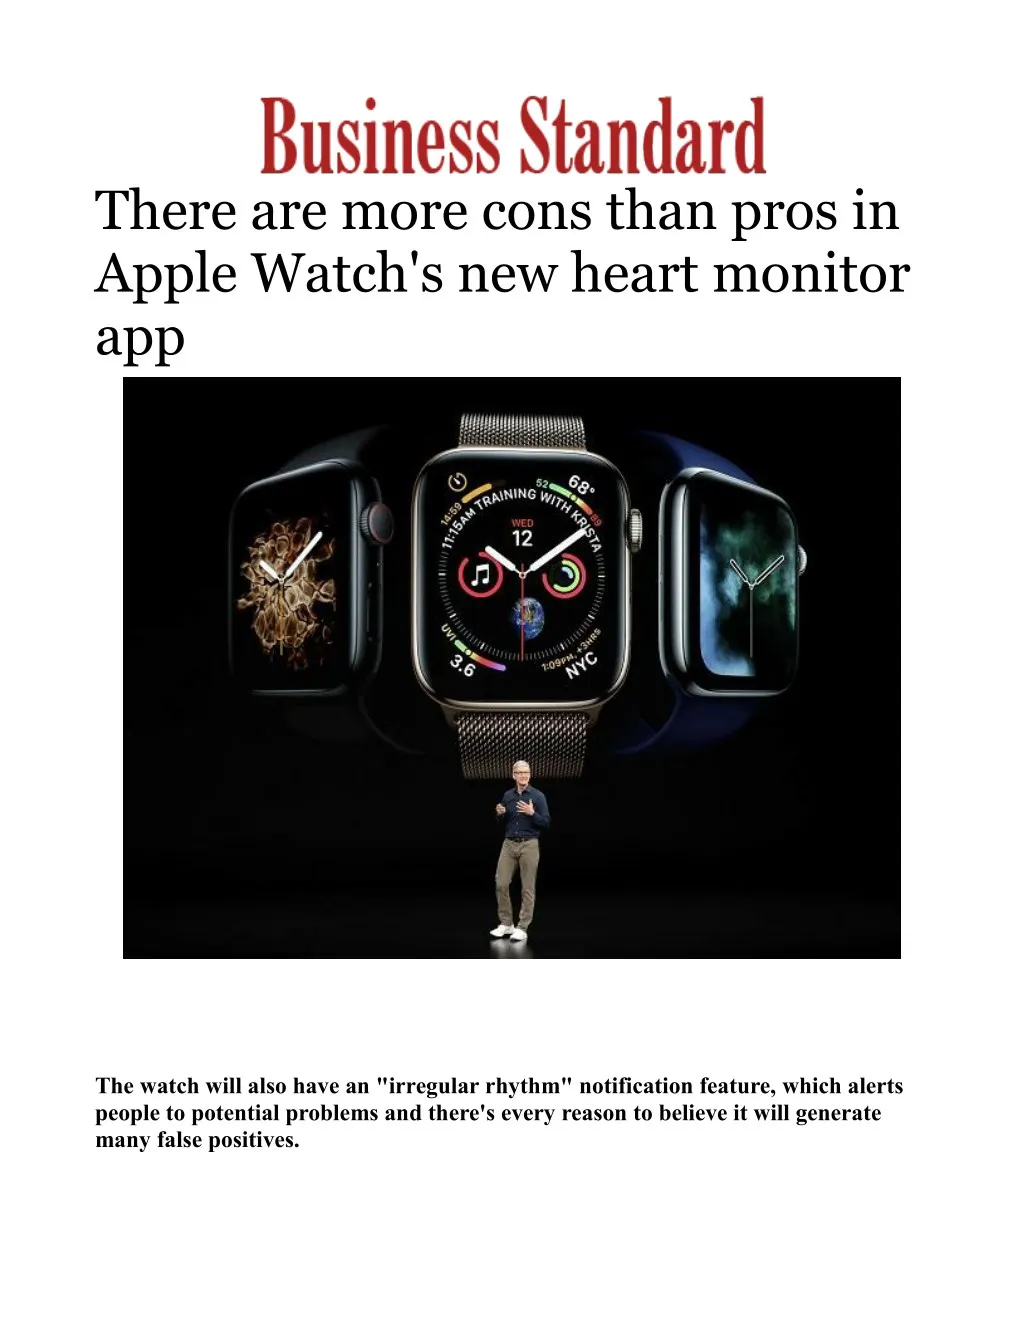 there are more cons than pros in apple watch